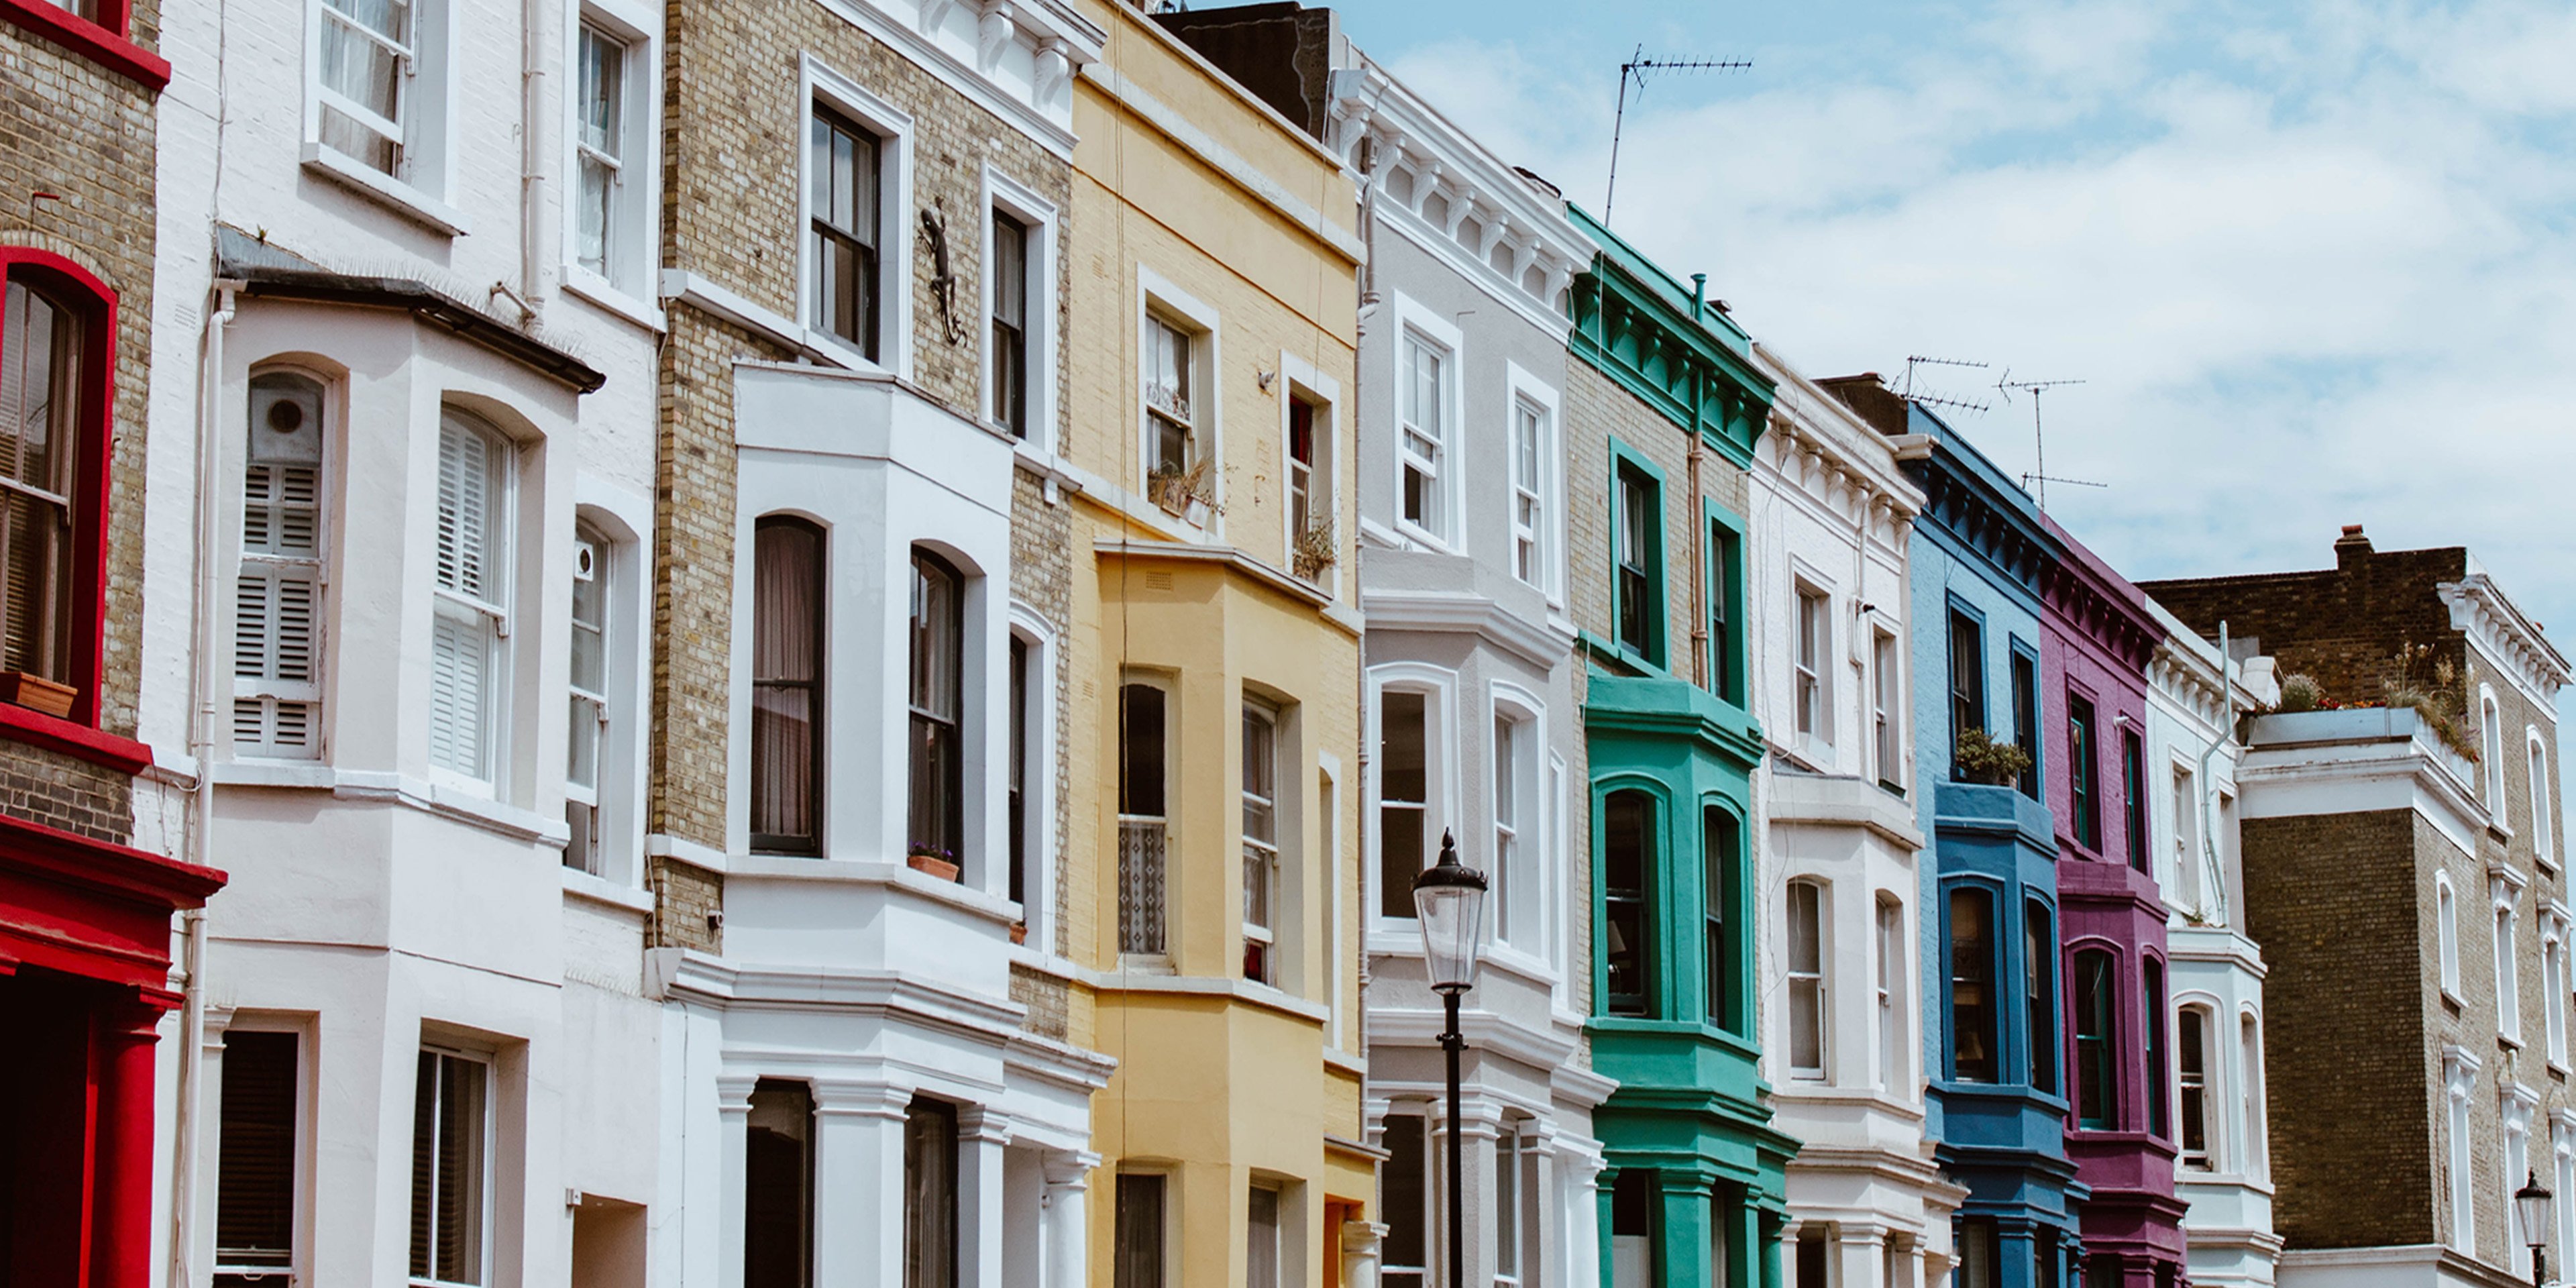 1 in 10 Landlords will exit the market – how will this affect letting agents?